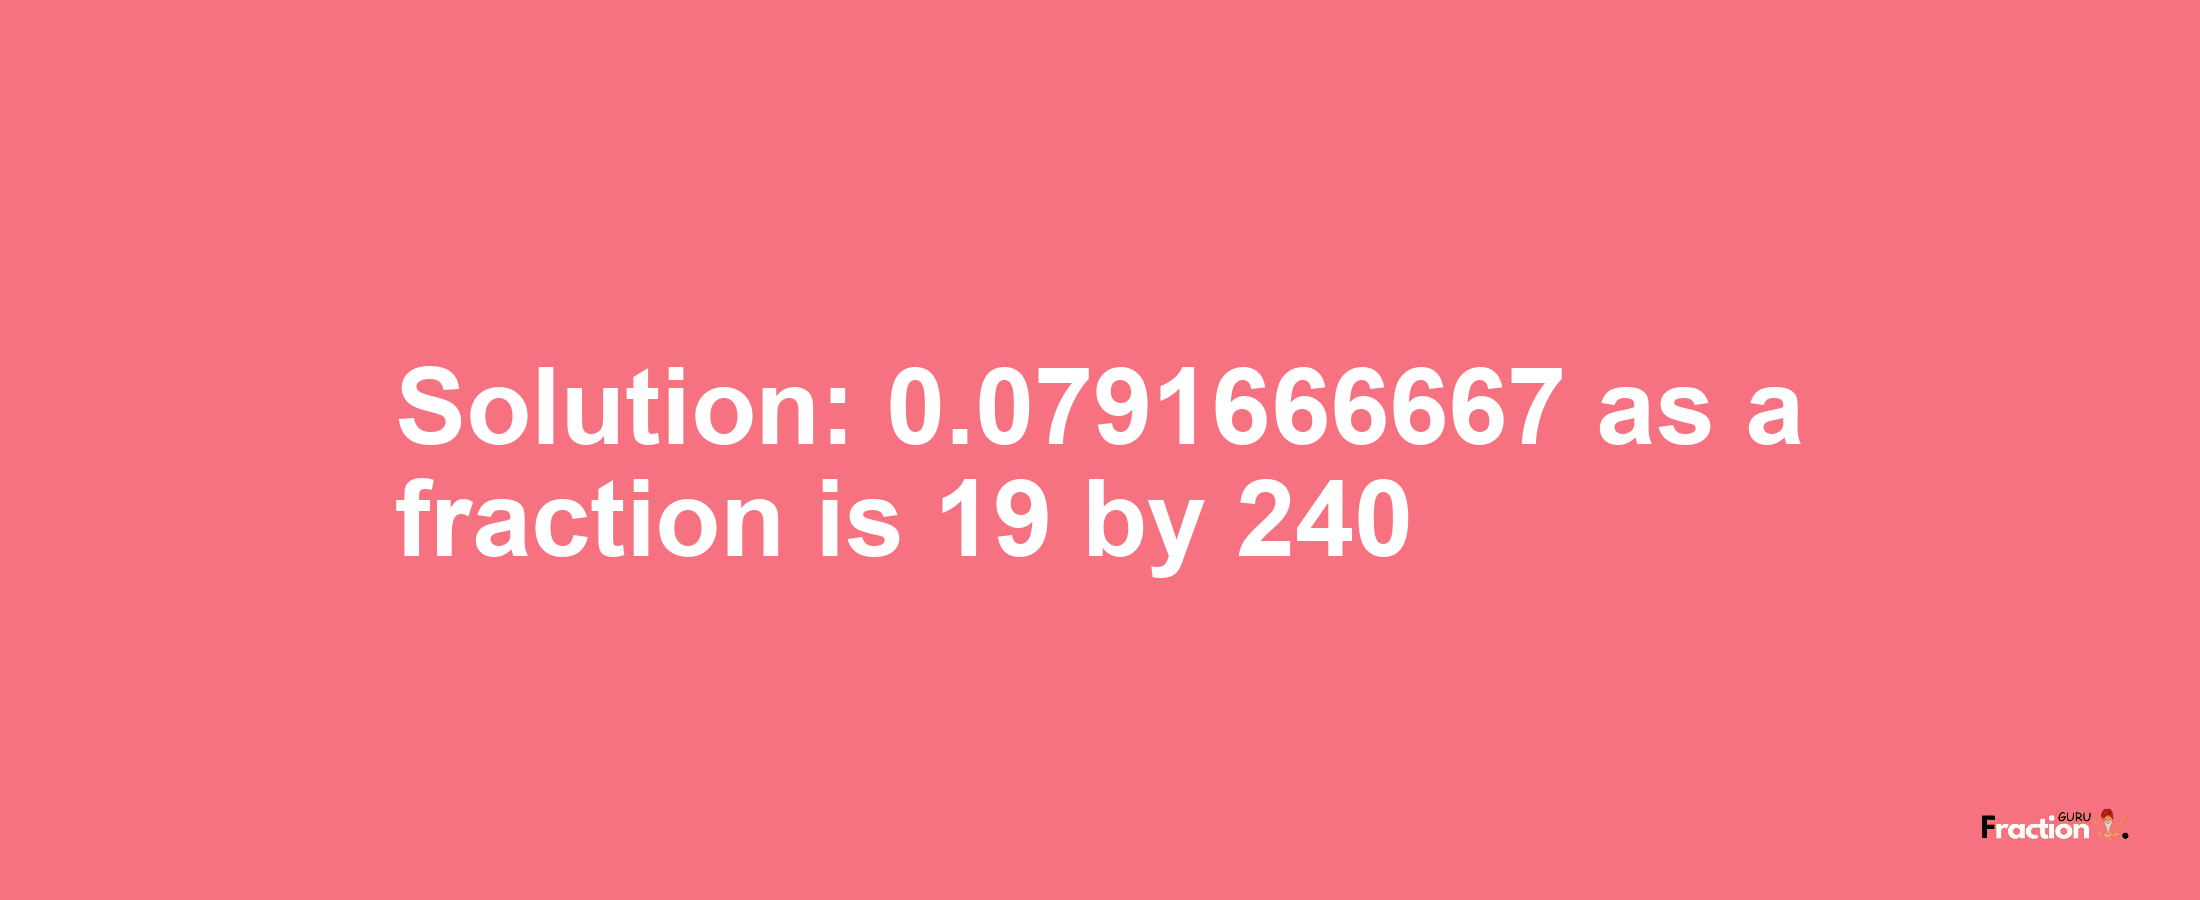 Solution:0.0791666667 as a fraction is 19/240